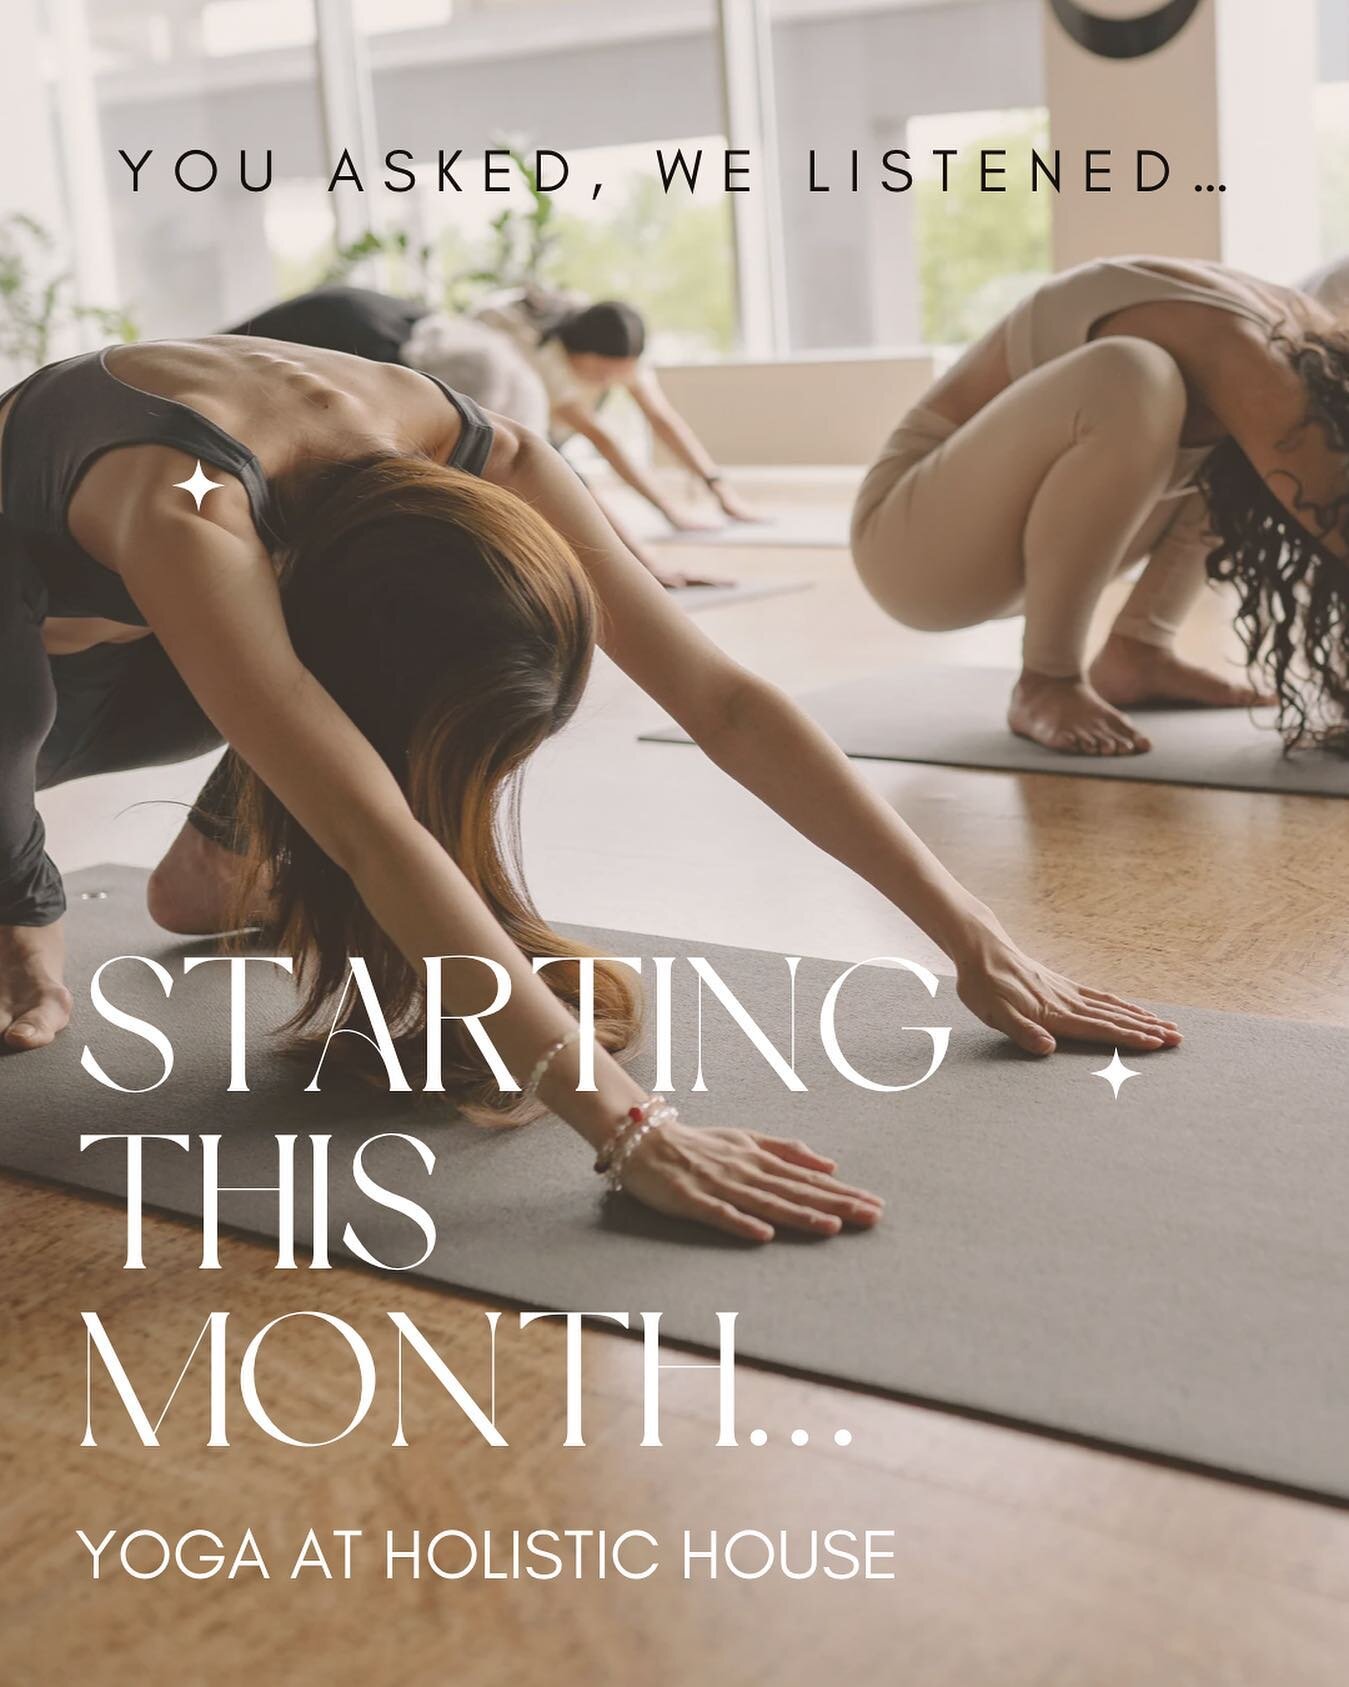 You asked, we listened&hellip; YOGA AT HOLISTIC HOUSE 🏠 🧘&zwj;♂️ 

Starting this month 🎉 

Contact the fabulous teachers directly for info and to book your spot:

&bull; Monday&rsquo;s at 7pm: Face Yoga with @purafaceyoga (4week course)

&bull; Tu